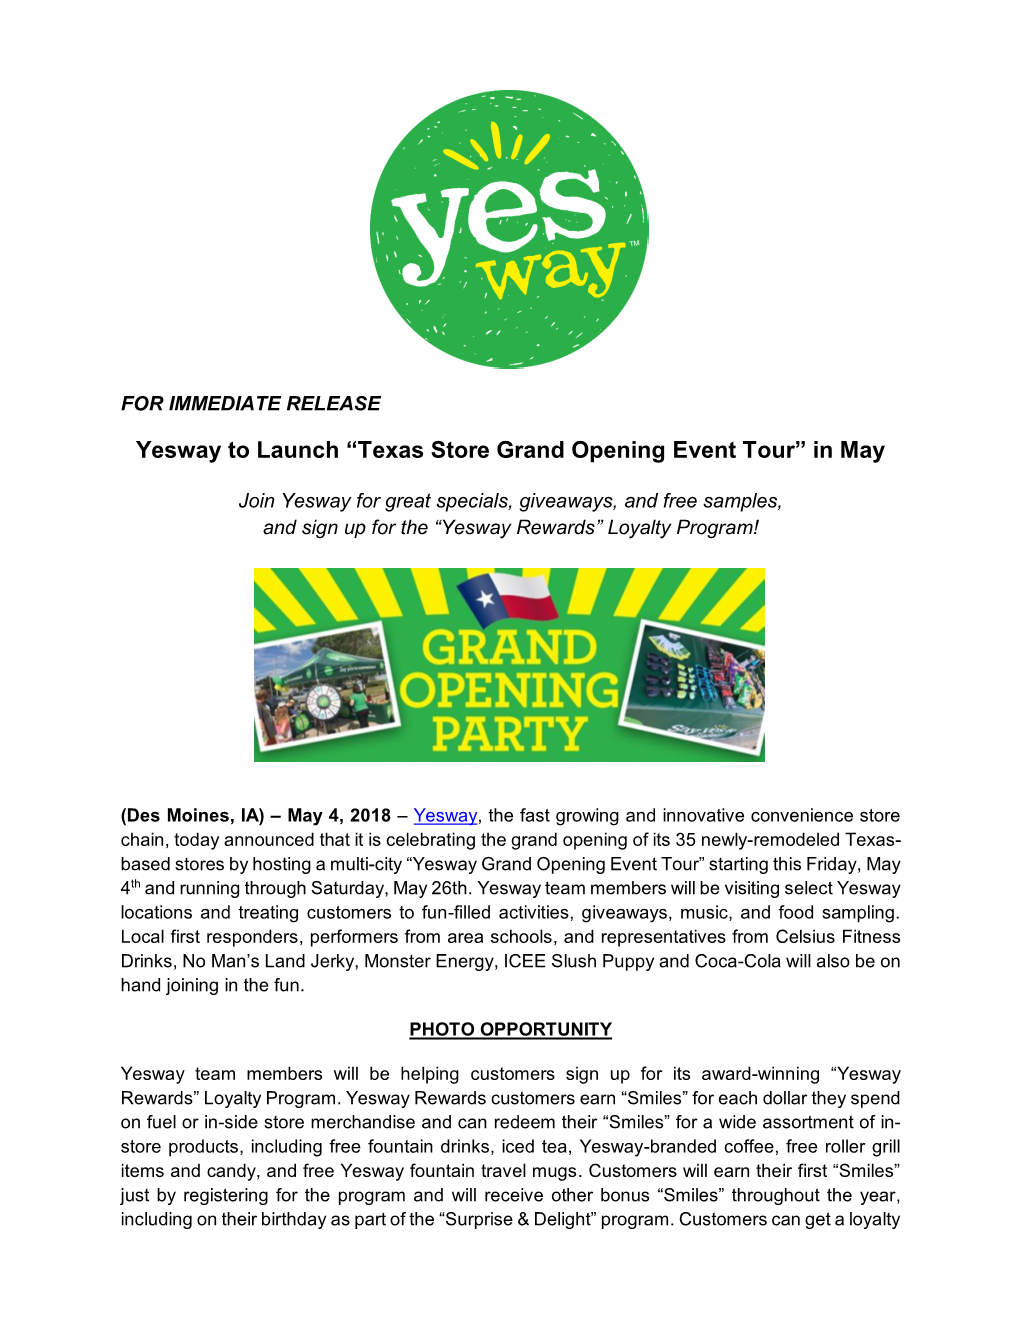 Yesway to Launch “Texas Store Grand Opening Event Tour” in May